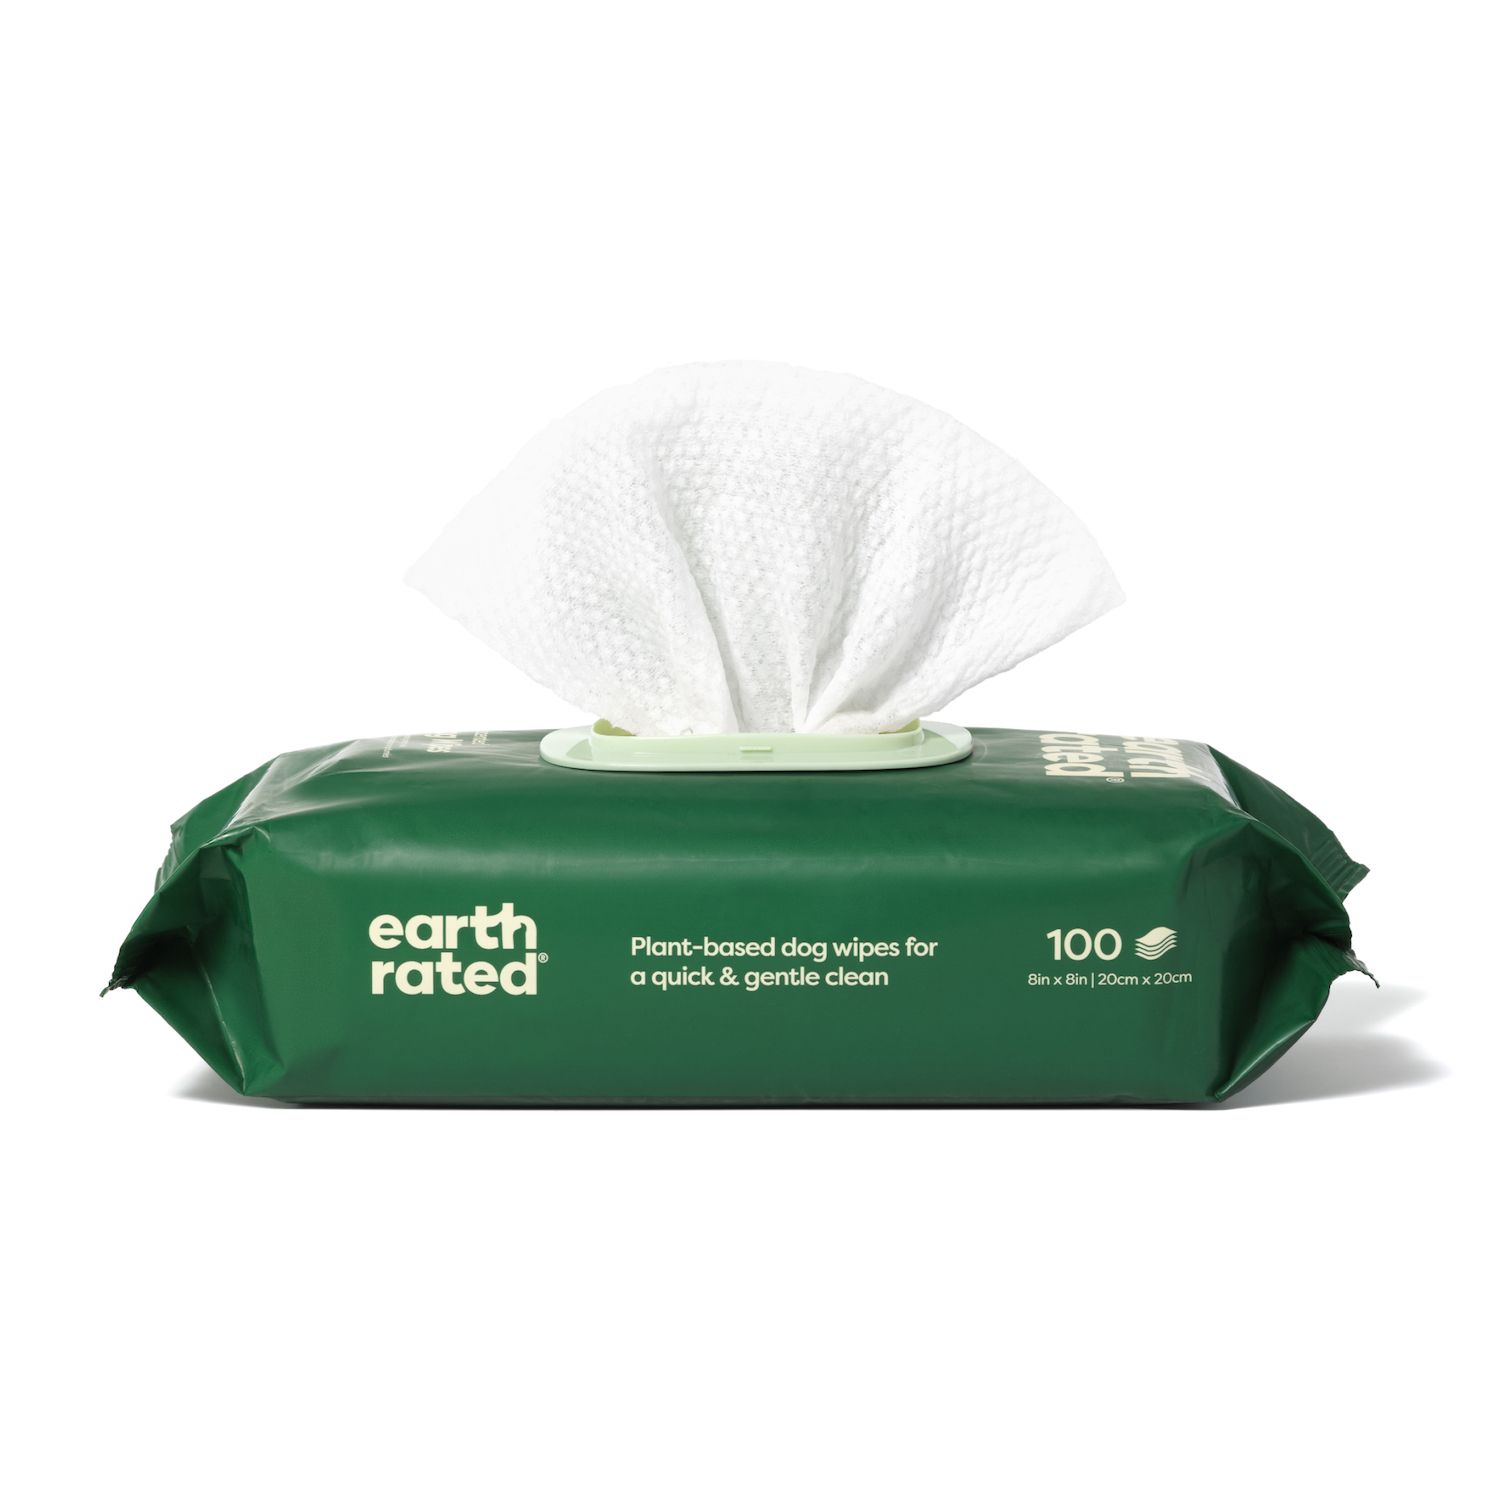 Image for Earth Rated USDA Certified Bio-Based Wipes - Unscented at Kohl's.